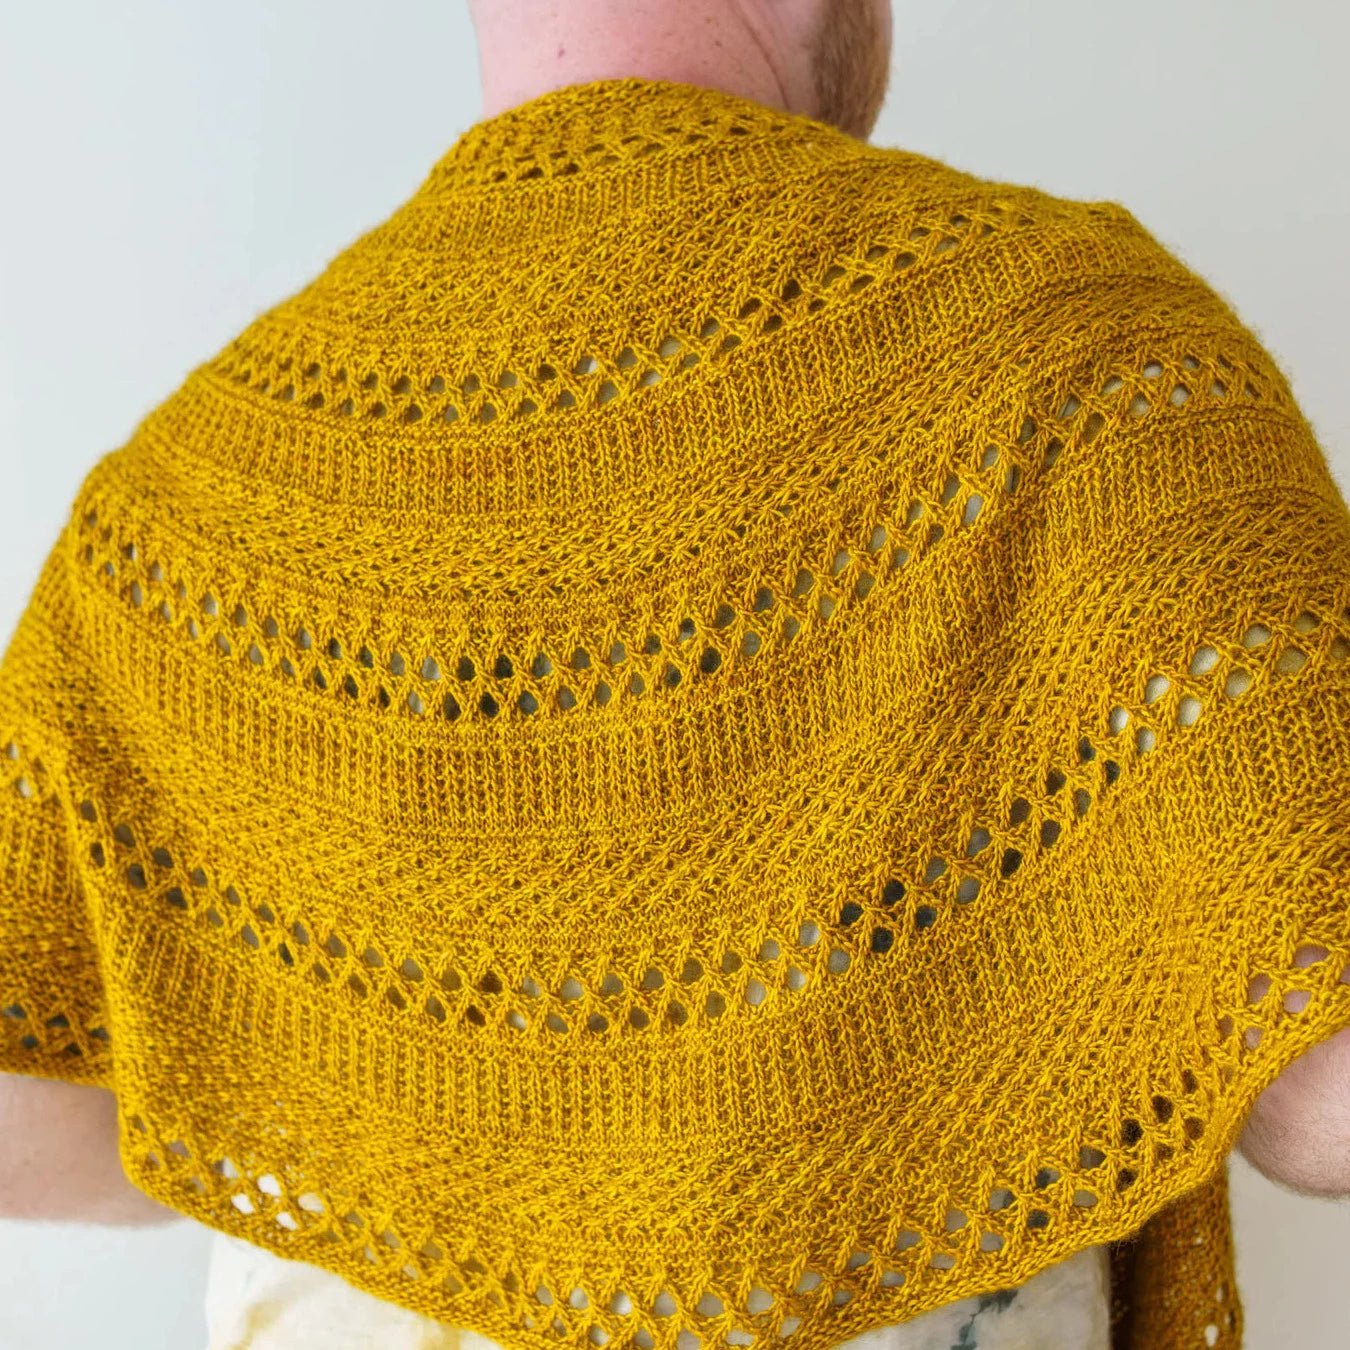 Mingling Daisies Shawl Knitting Kit - Westknits - Biscuit - The Little Yarn Store